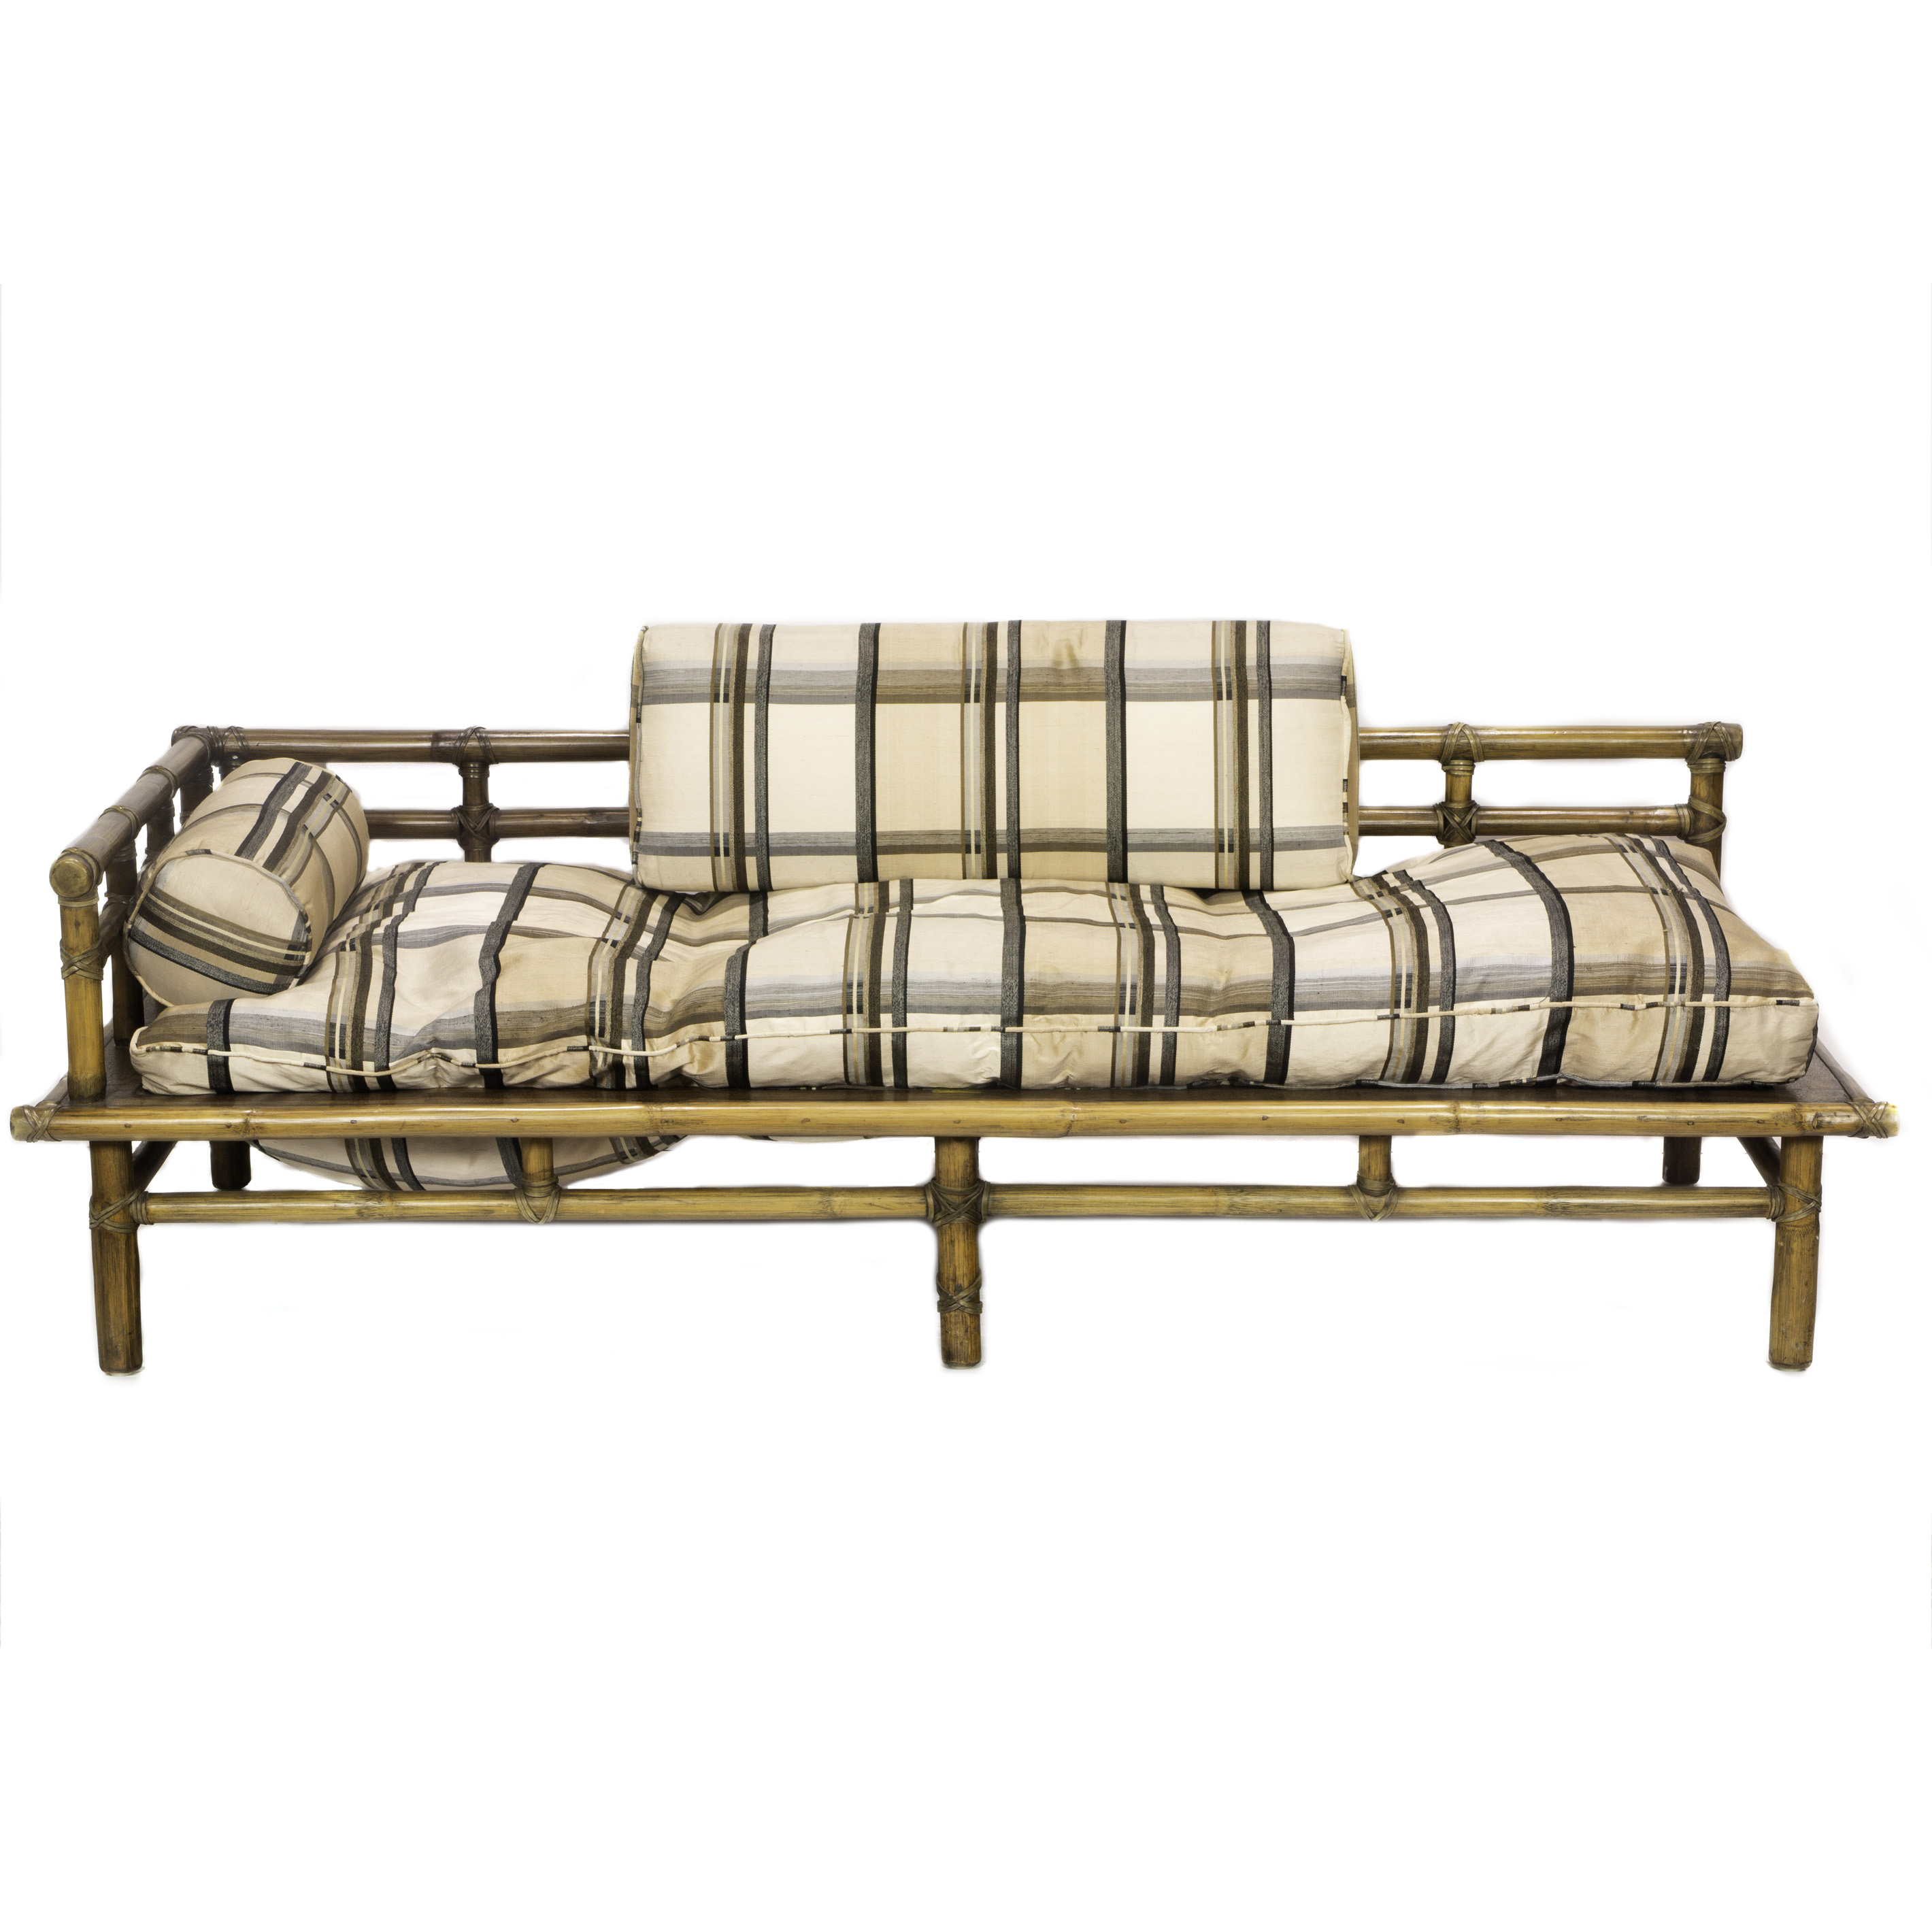 MCGUIRE DAYBED FAUX BAMBOO FRAME 3a48af